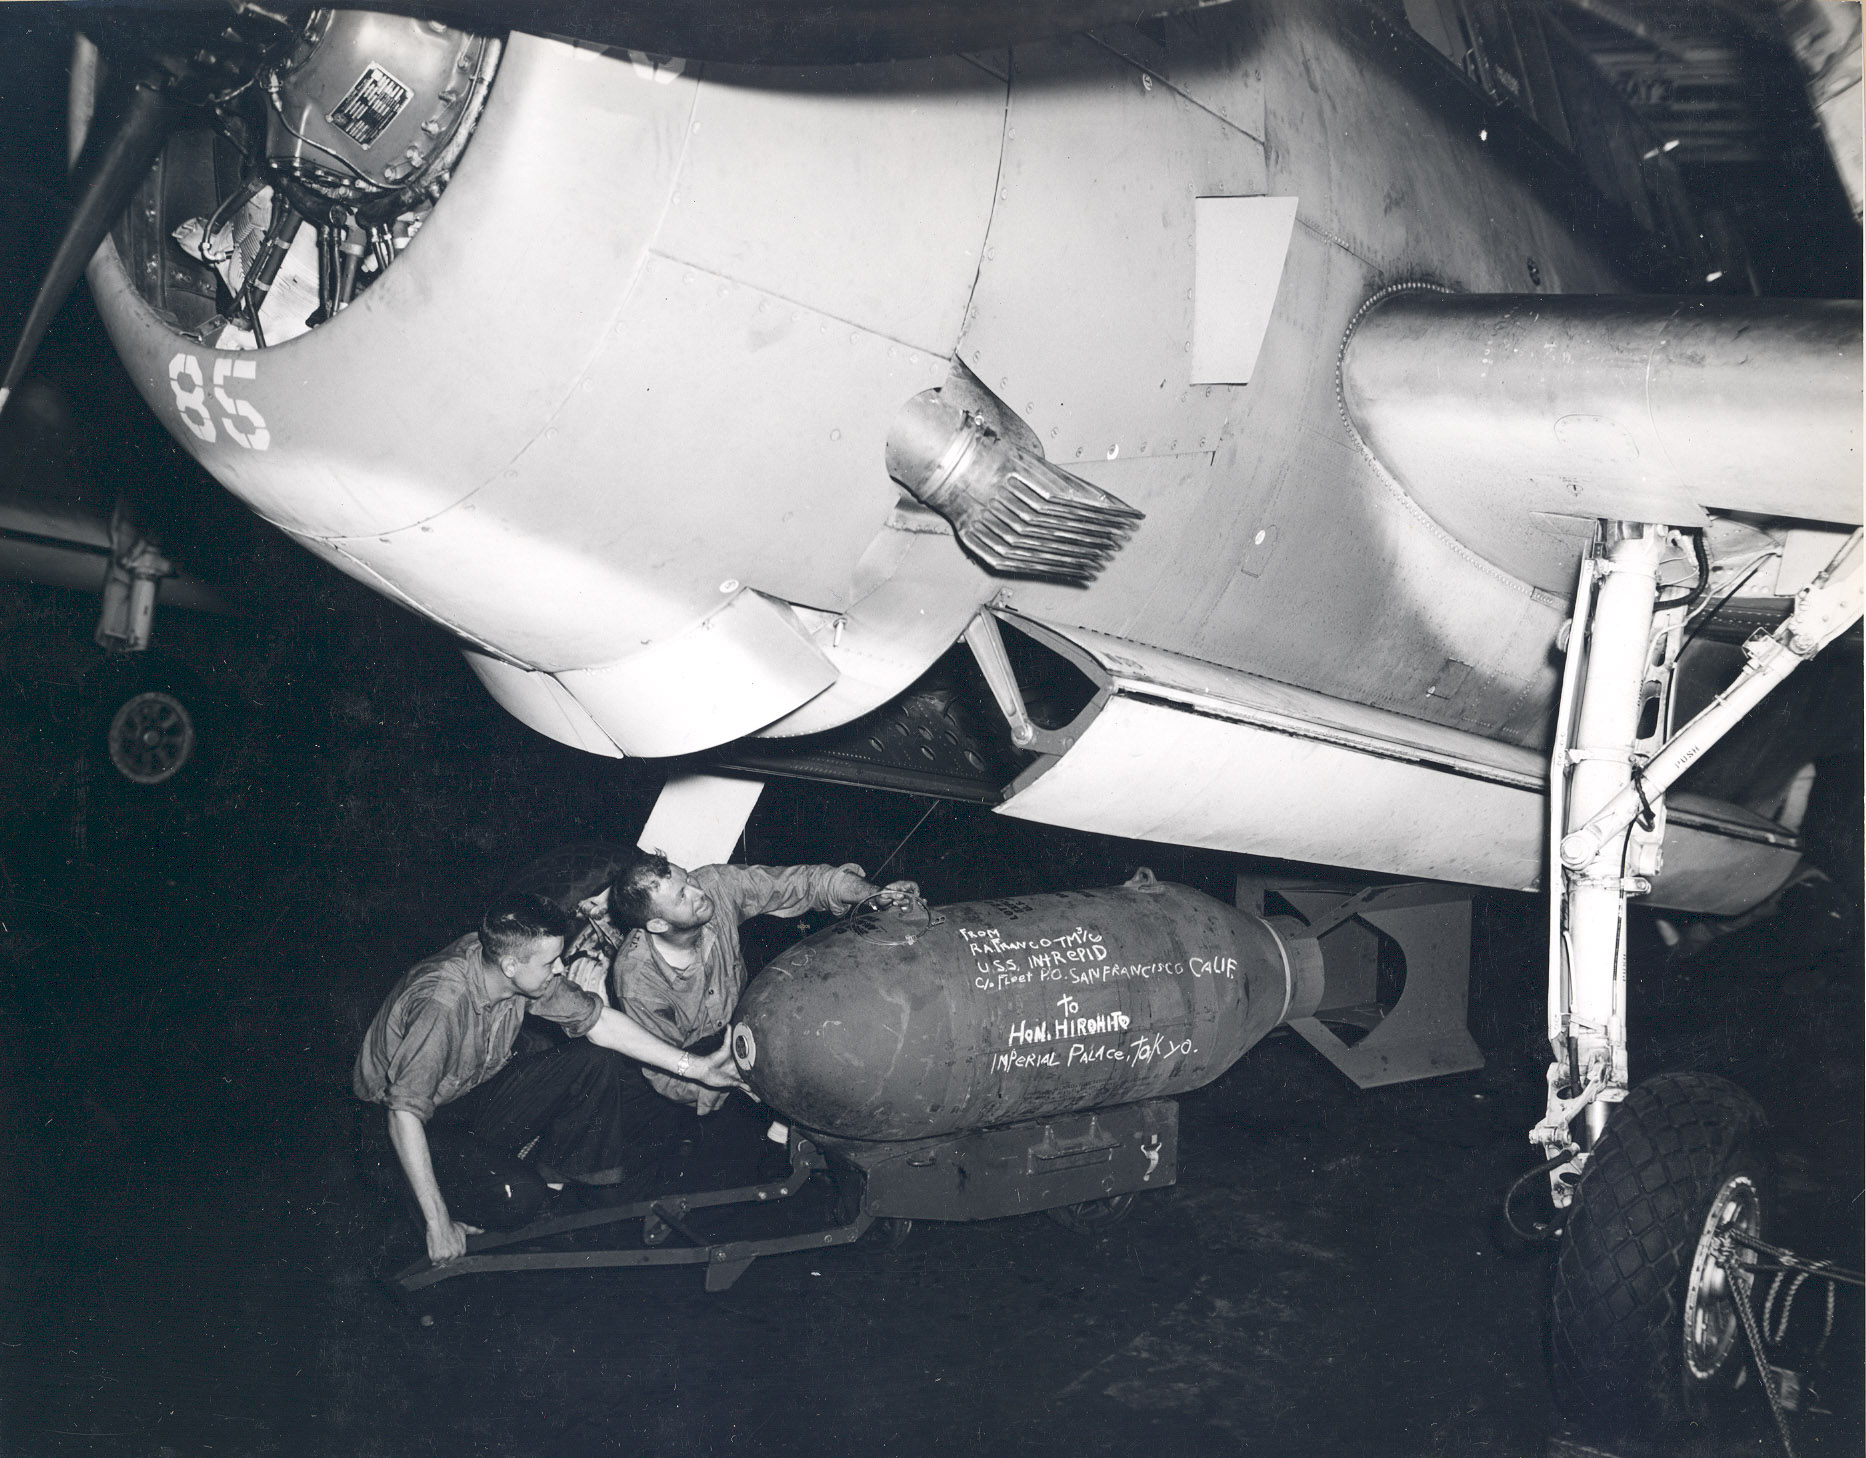 Ordinancemen loading a 1,000-pound bomb into the bombay of a TBM-1C aboard USS Intrepid, 1943-1945; note flame arrester on the plane’s exhaust port